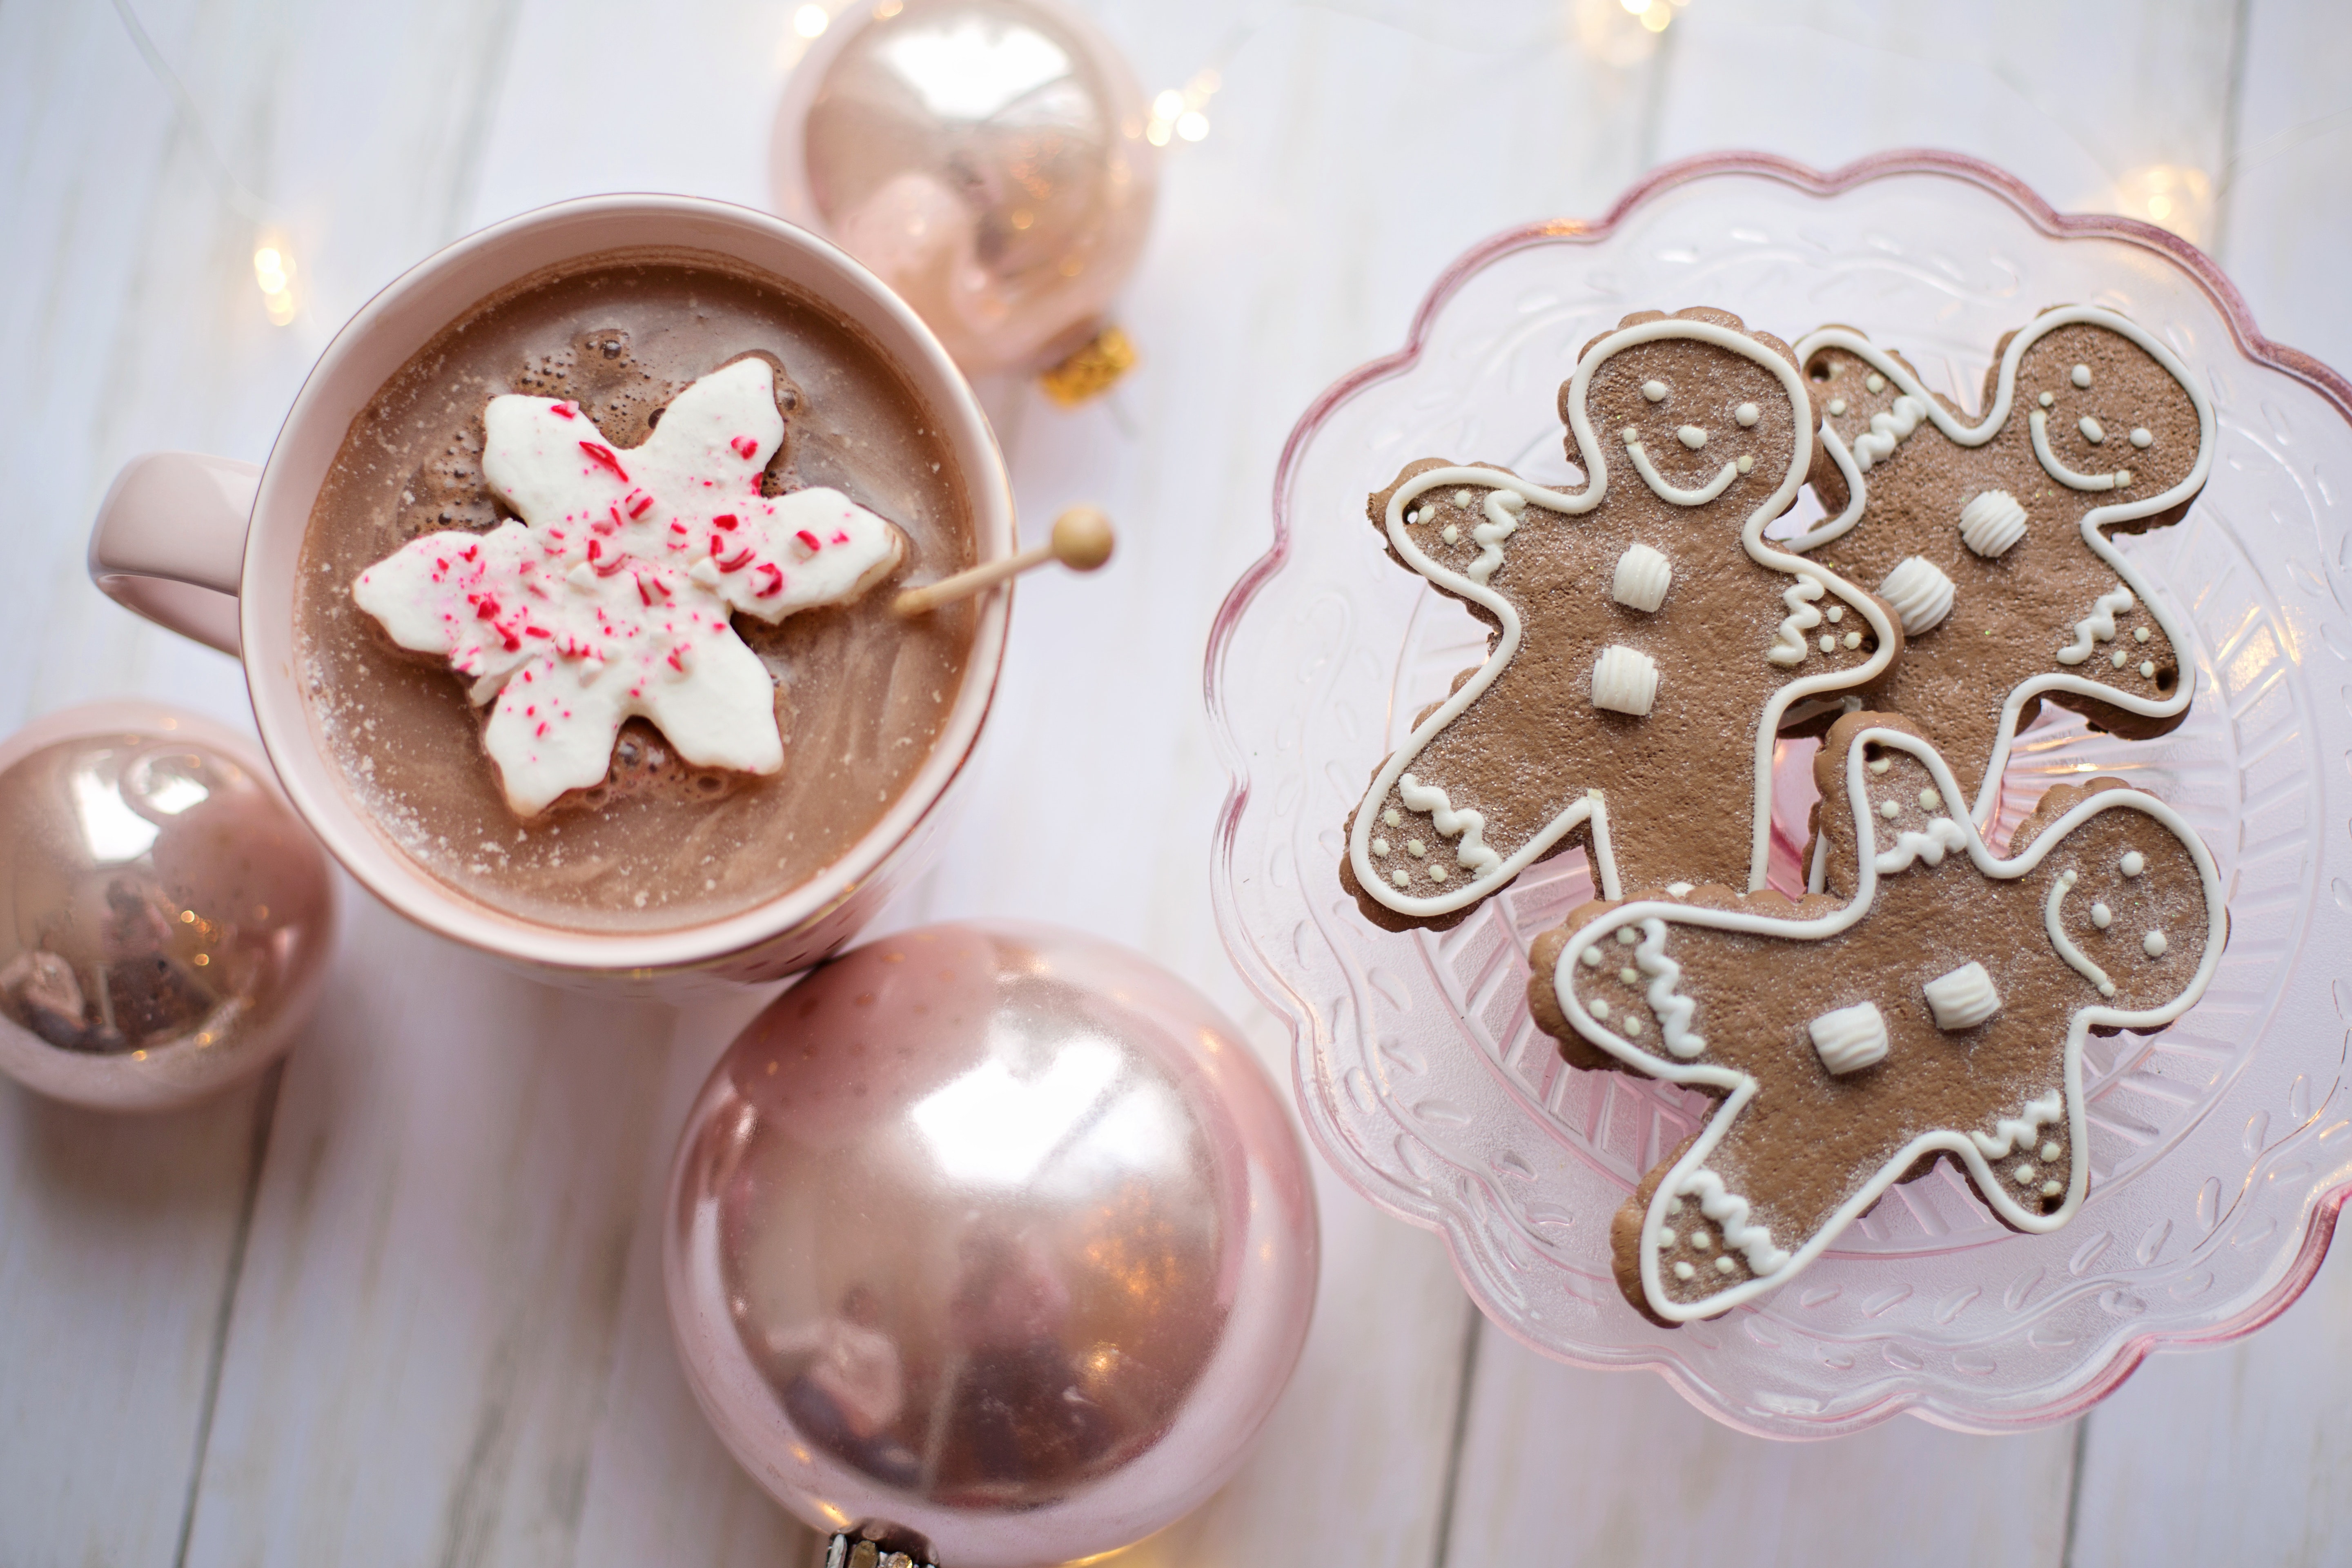 Hot chocolate and gingerbread cookies on a light wood table with pink decor accents